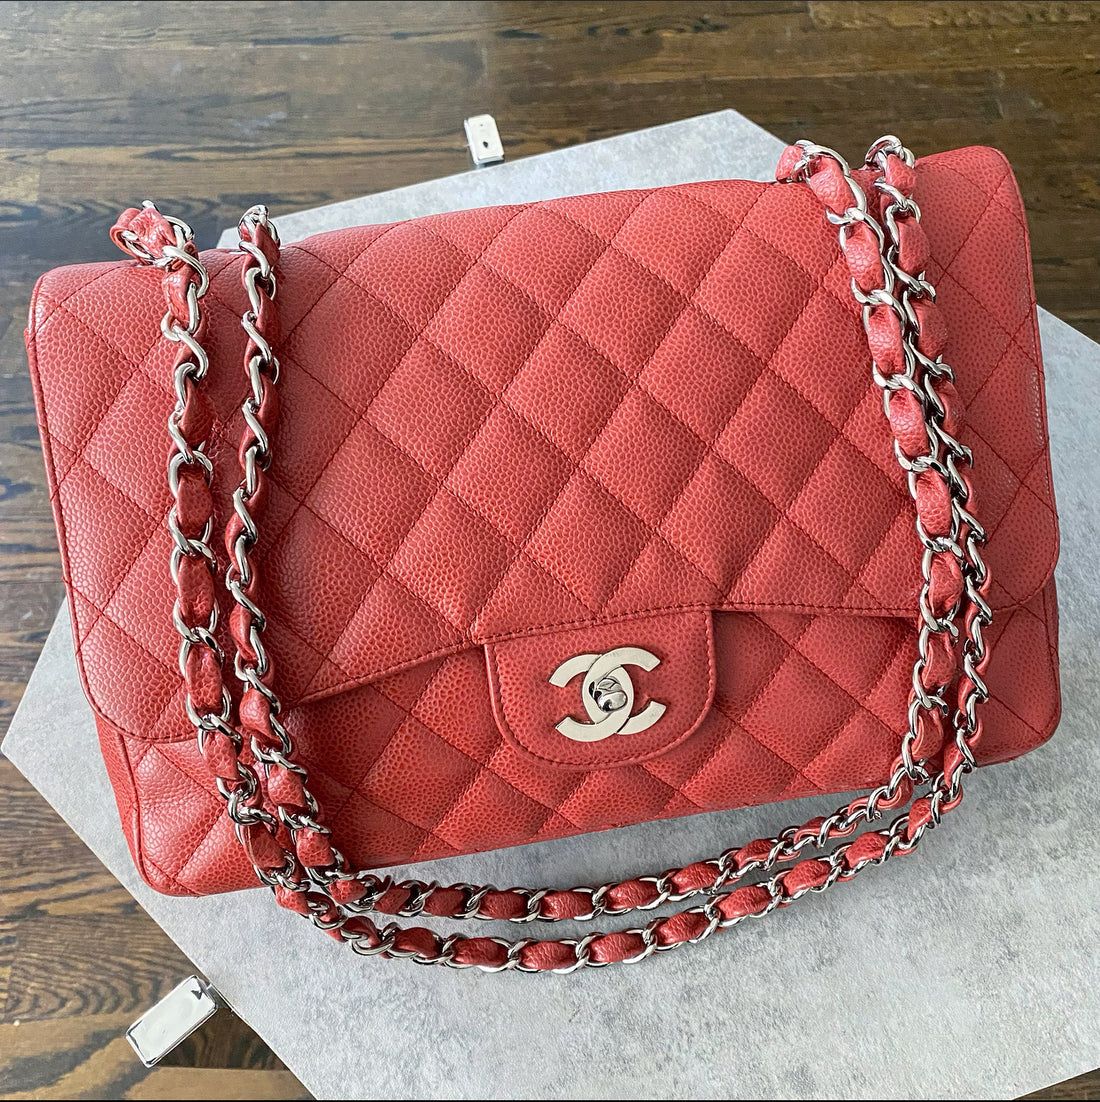 Snag the Latest CHANEL Classic Bags & Handbags for Women with Fast and Free  Shipping. Authenticity Guaranteed on Designer Handbags $500+ at .